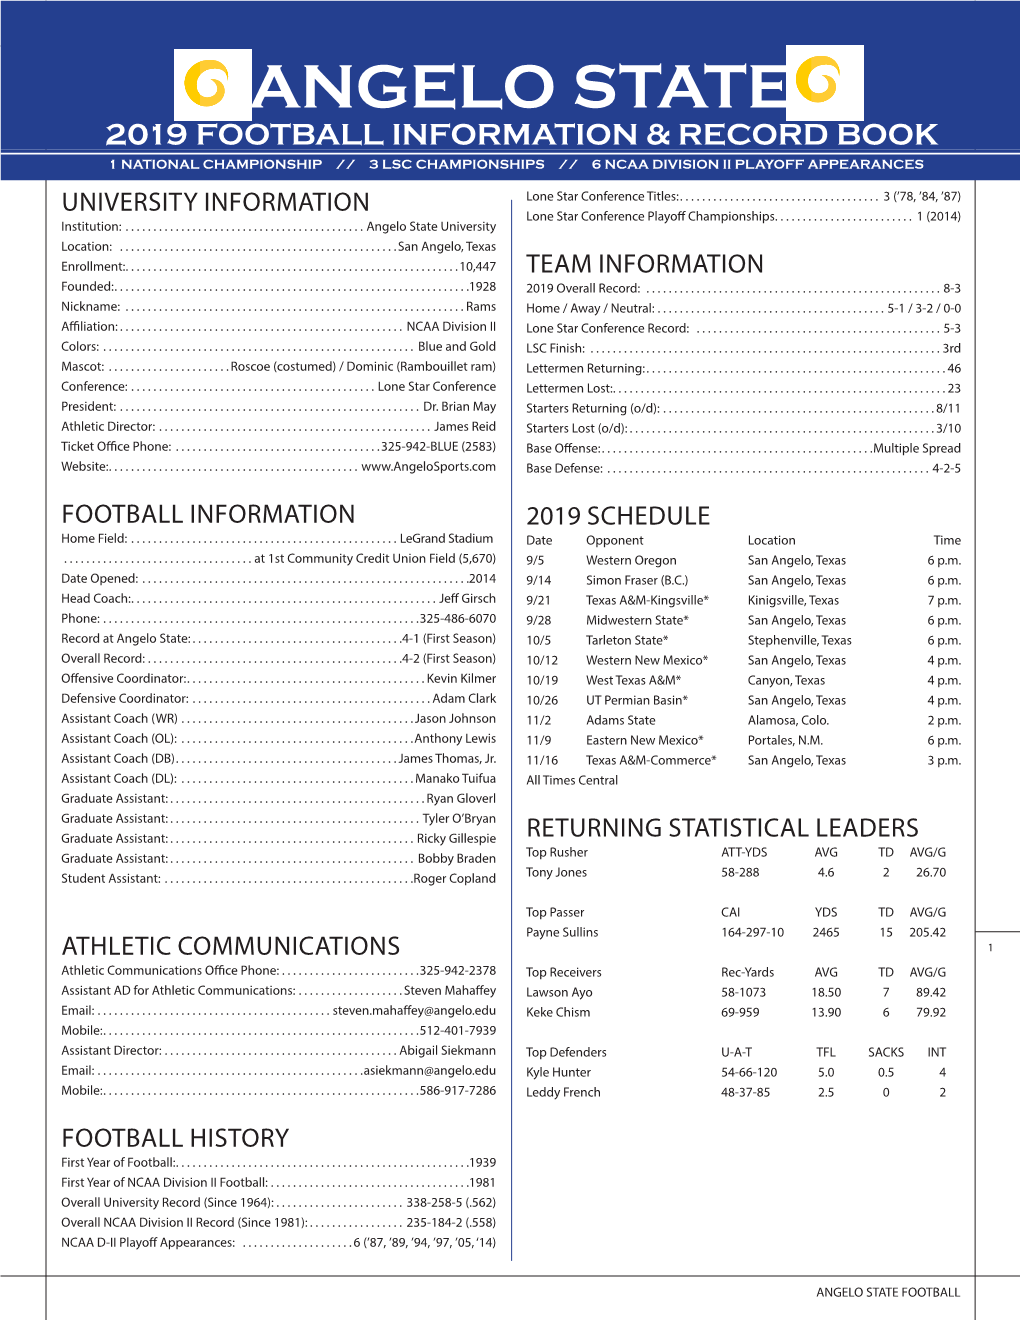 Angelo State 2019 Football Information & Record Book 1 National Championship // 3 Lsc Championships // 6 Ncaa Division Ii Playoff Appearances